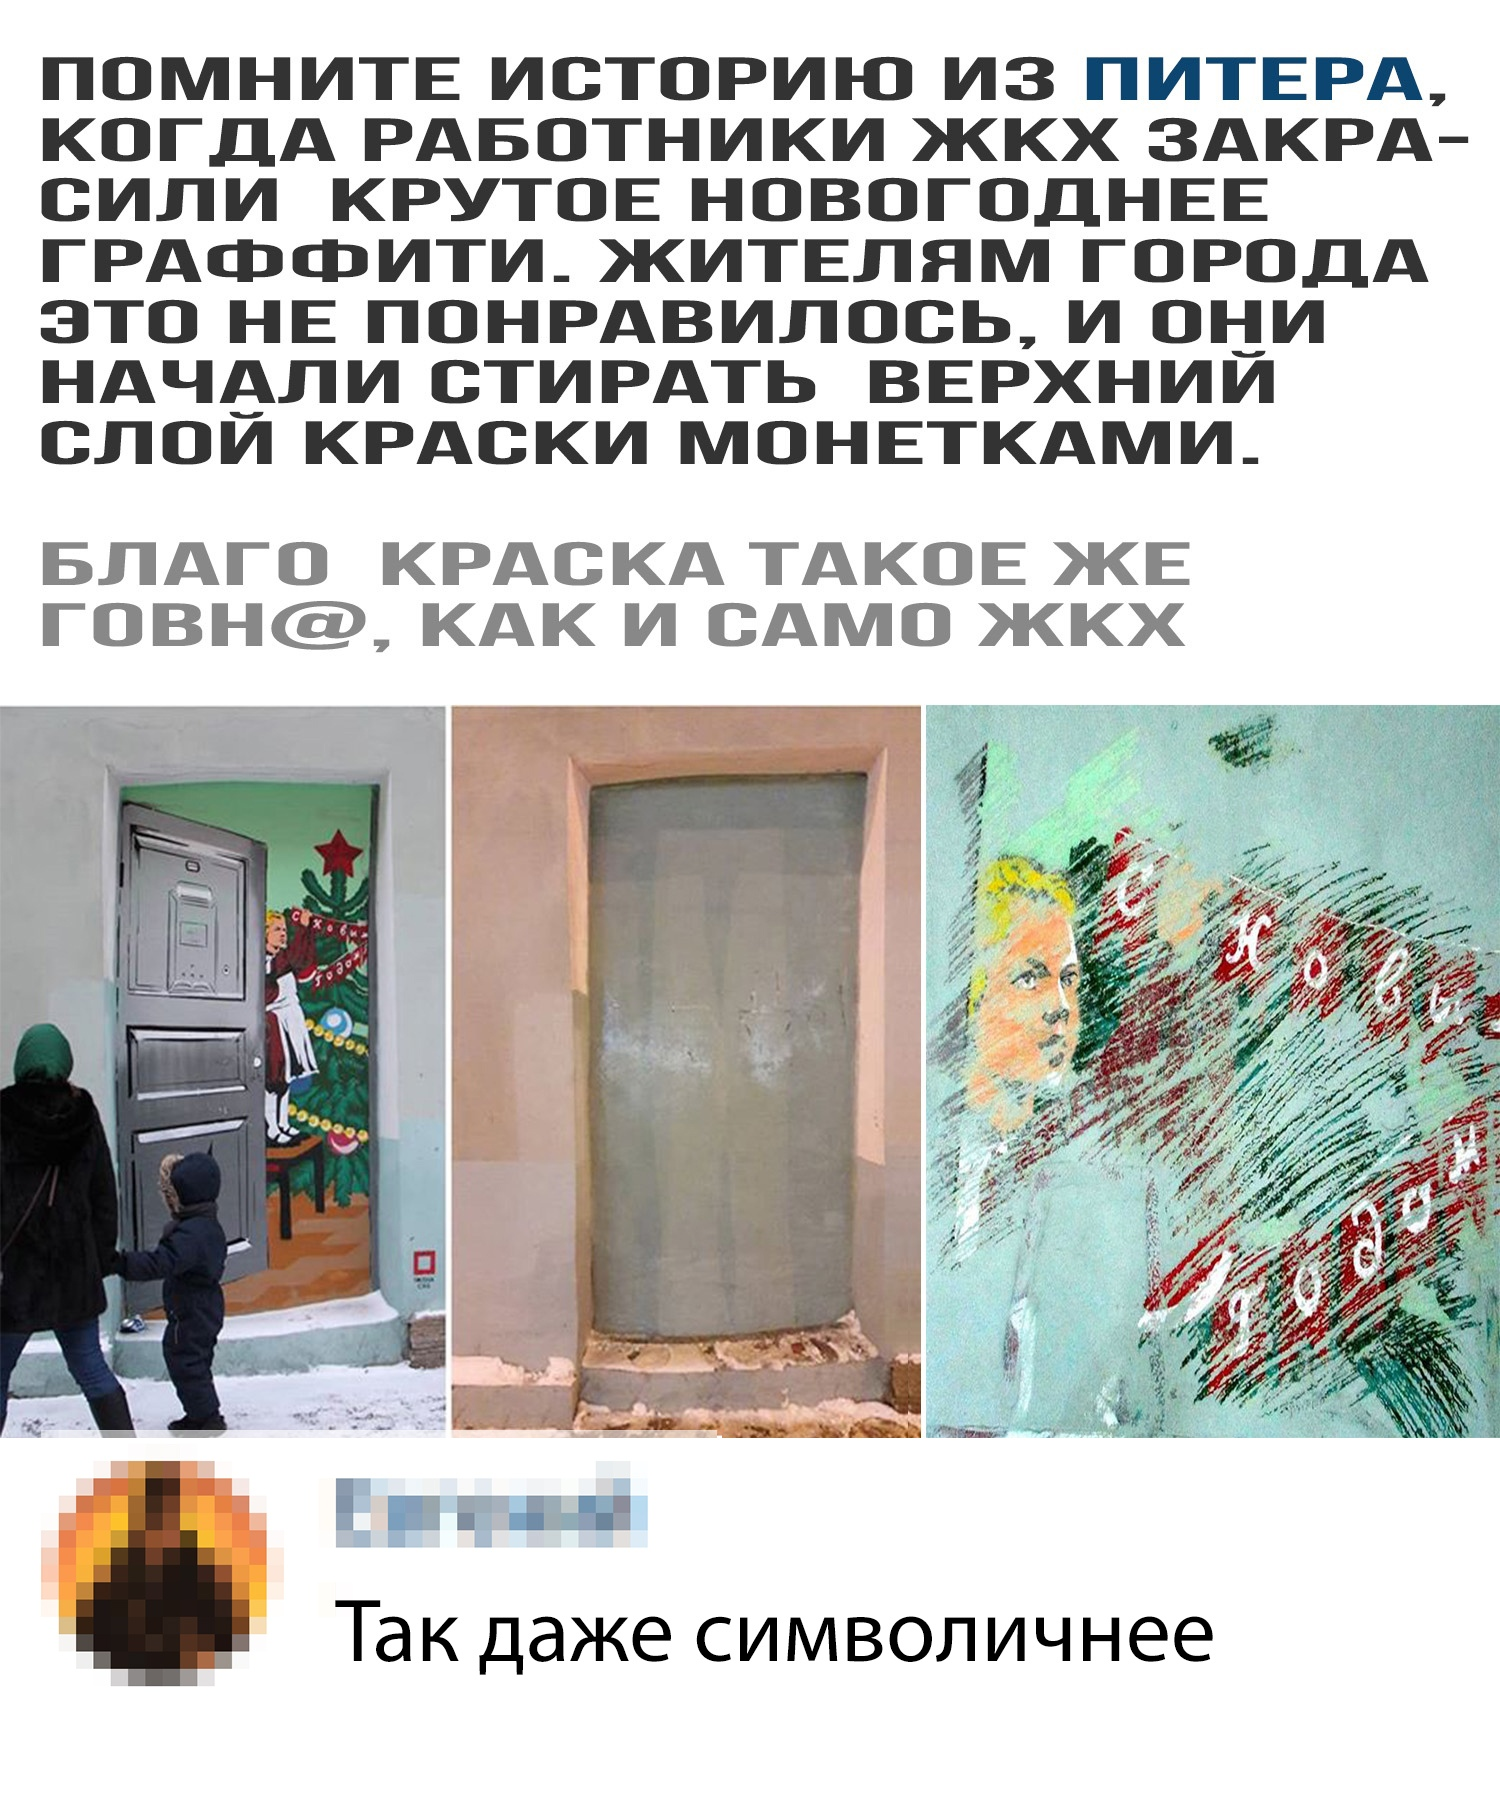 Street art in Russian. - Modern Art, Confrontation, Housing and communal services, Idiocy, Graffiti